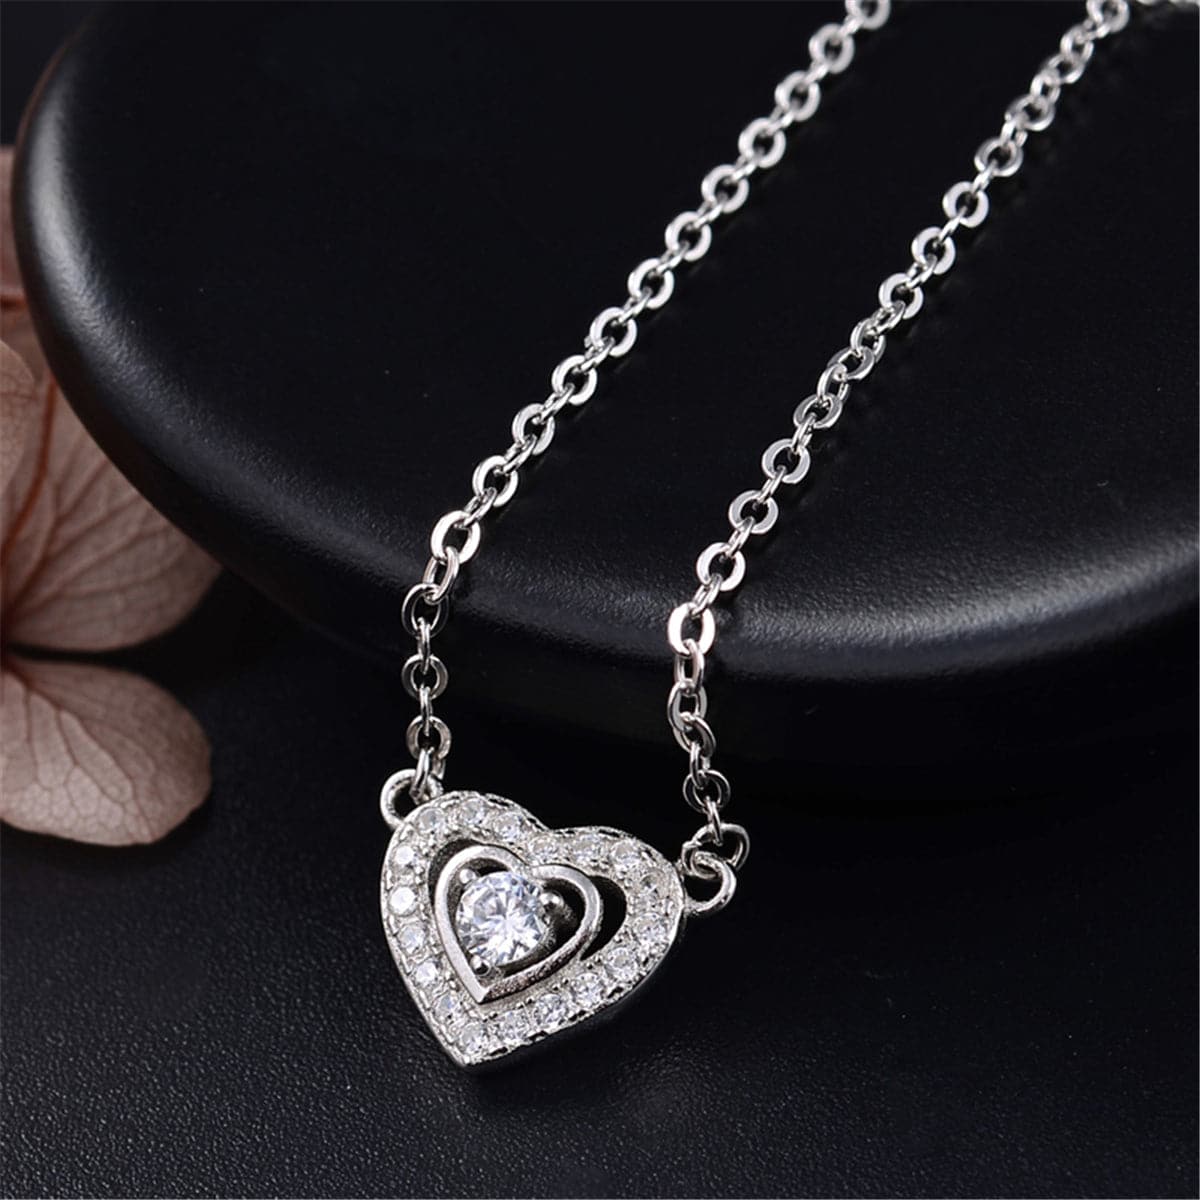 Cubic Zirconia & Sterling Silver Hola Heart Pendant Necklace